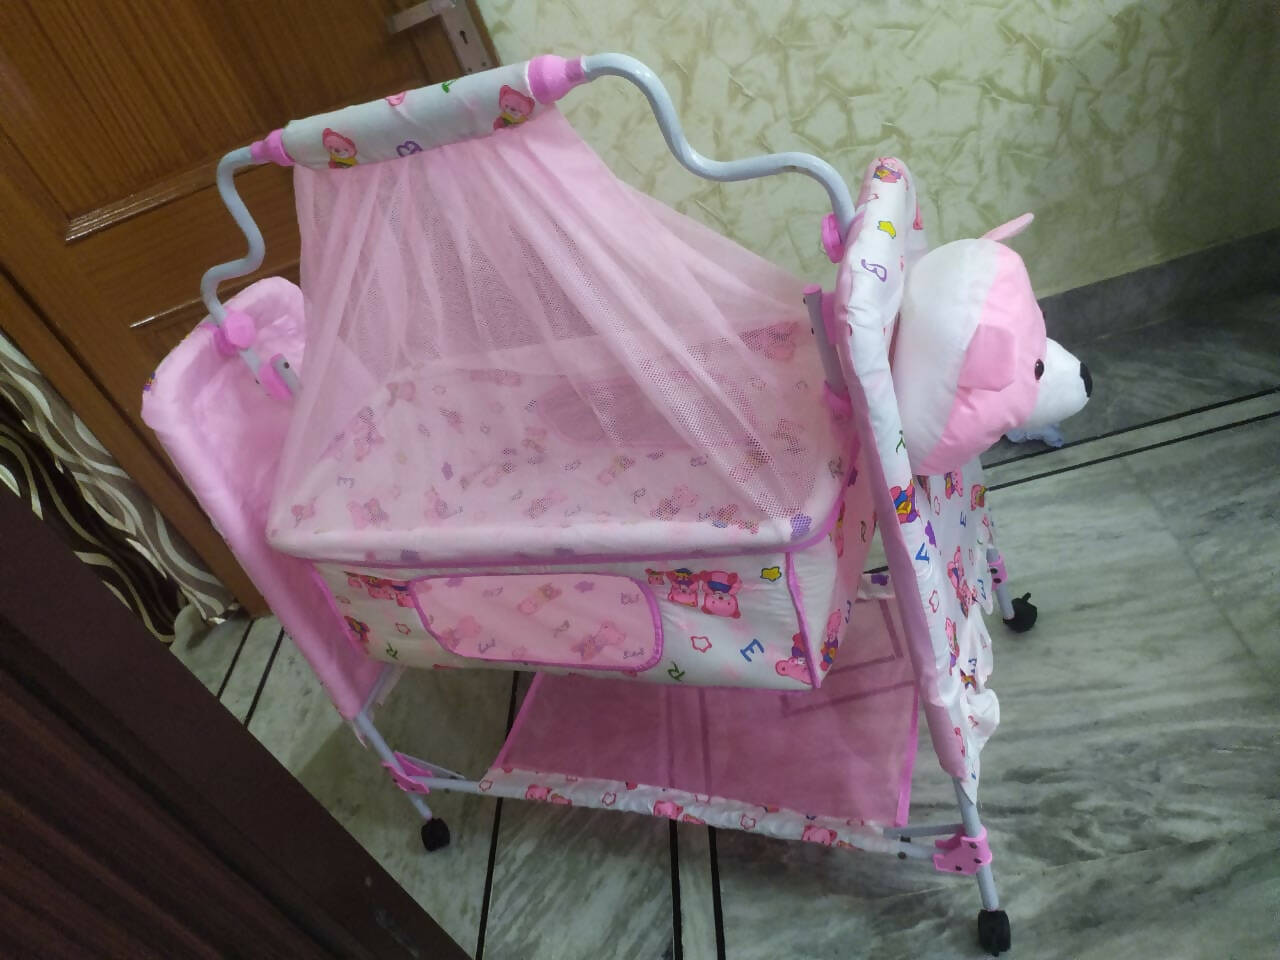 FUNBABY Cradle for Baby- Pink